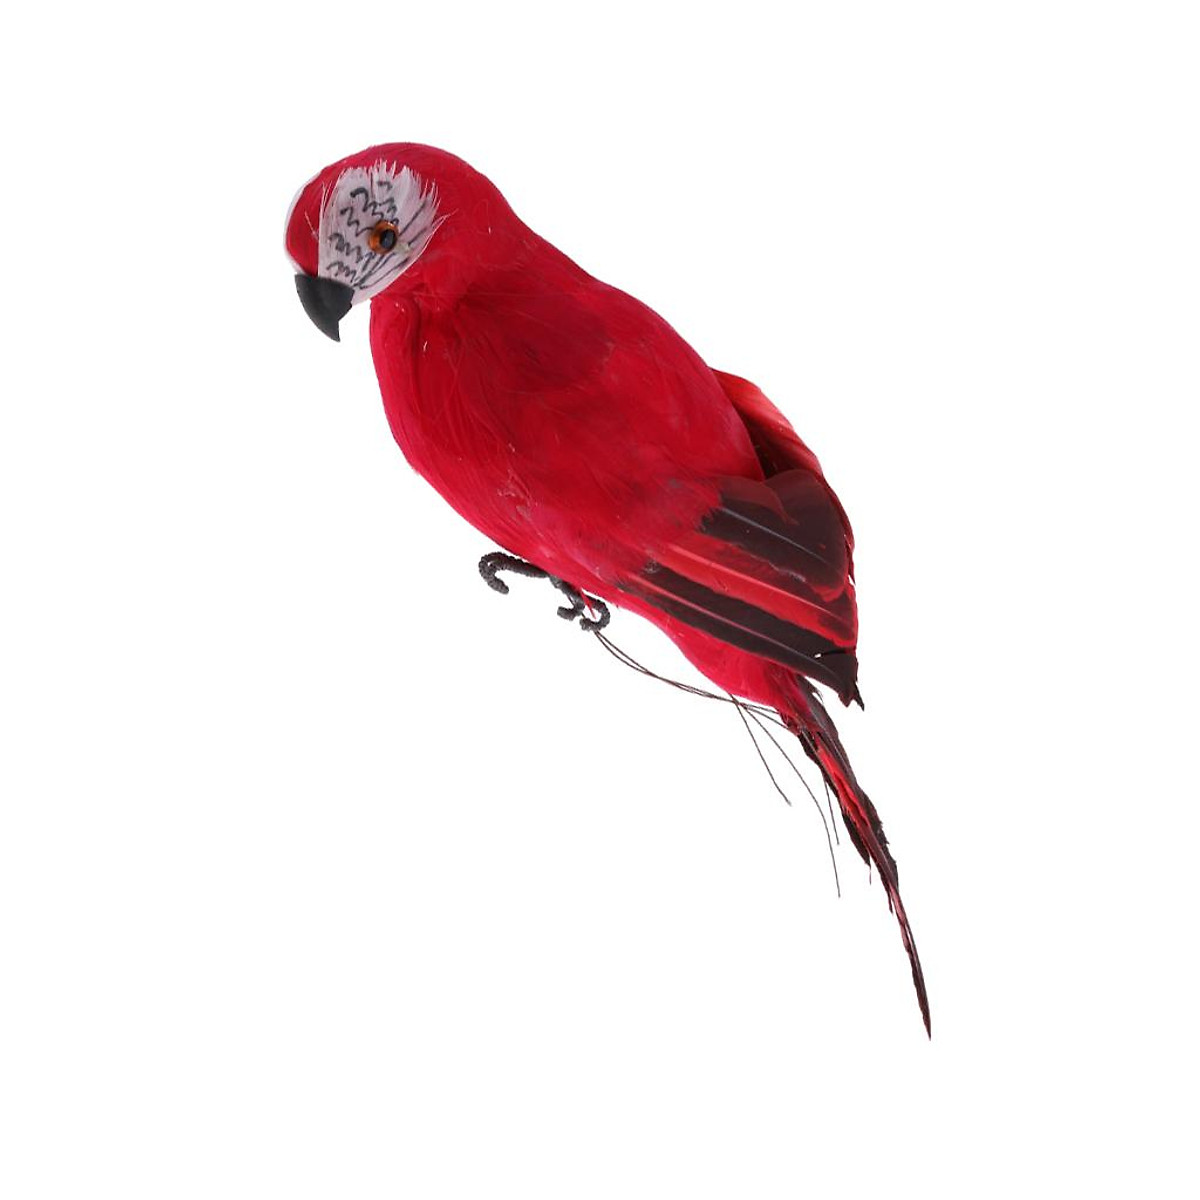 2xRealistic Macaw Parrot Artificial Feather Bird Animal Ornament Toy Red